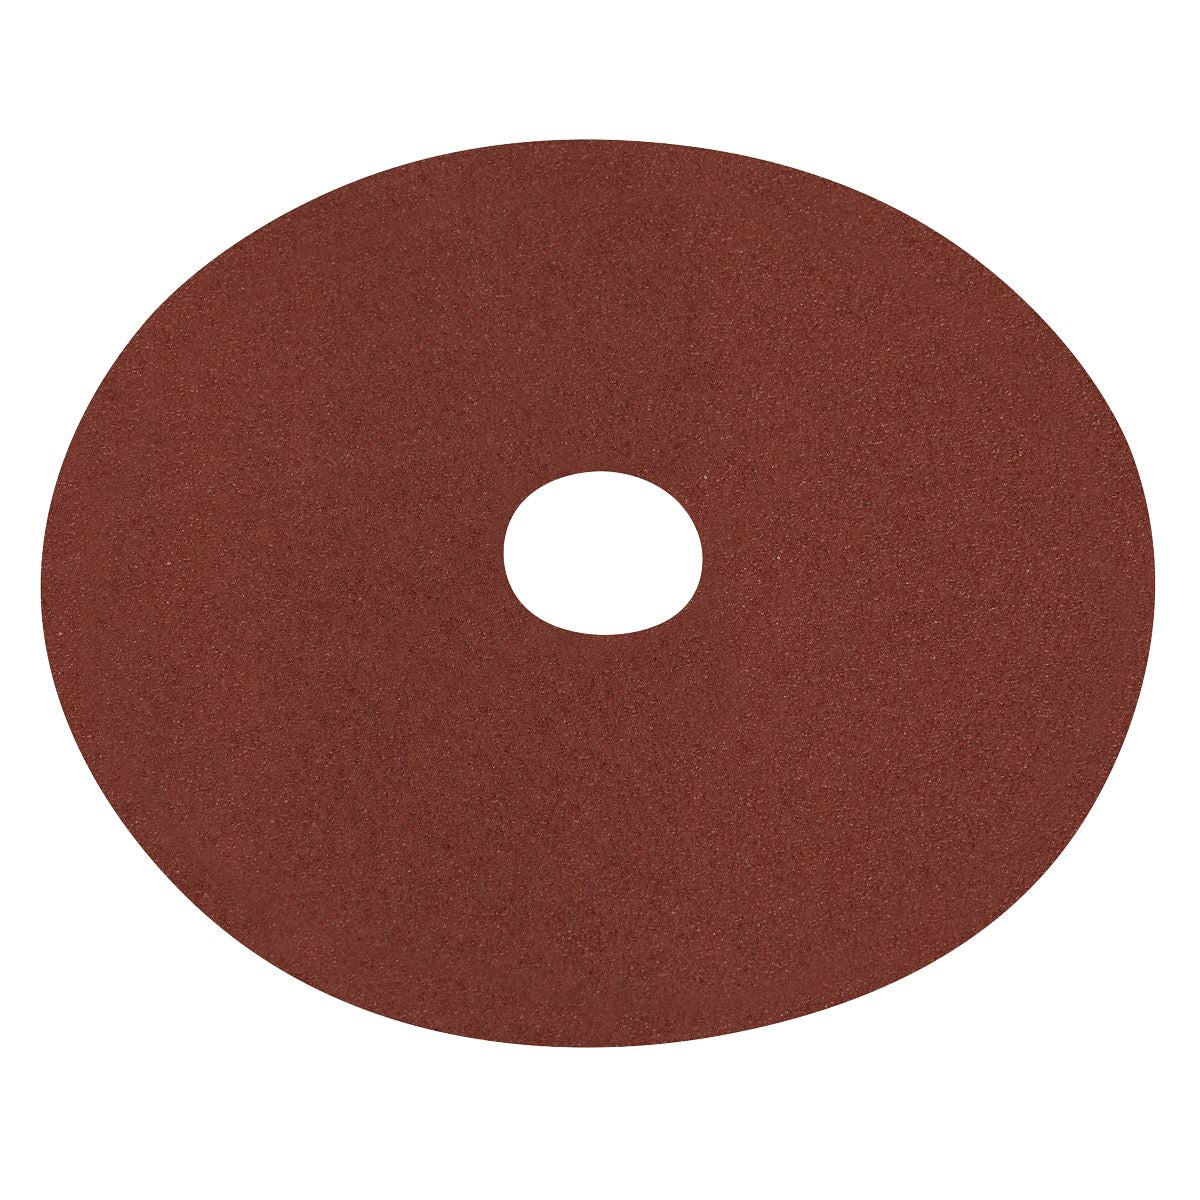 Worksafe by Sealey Fibre Backed Disc Ø125mm - 60Grit Pack of 25